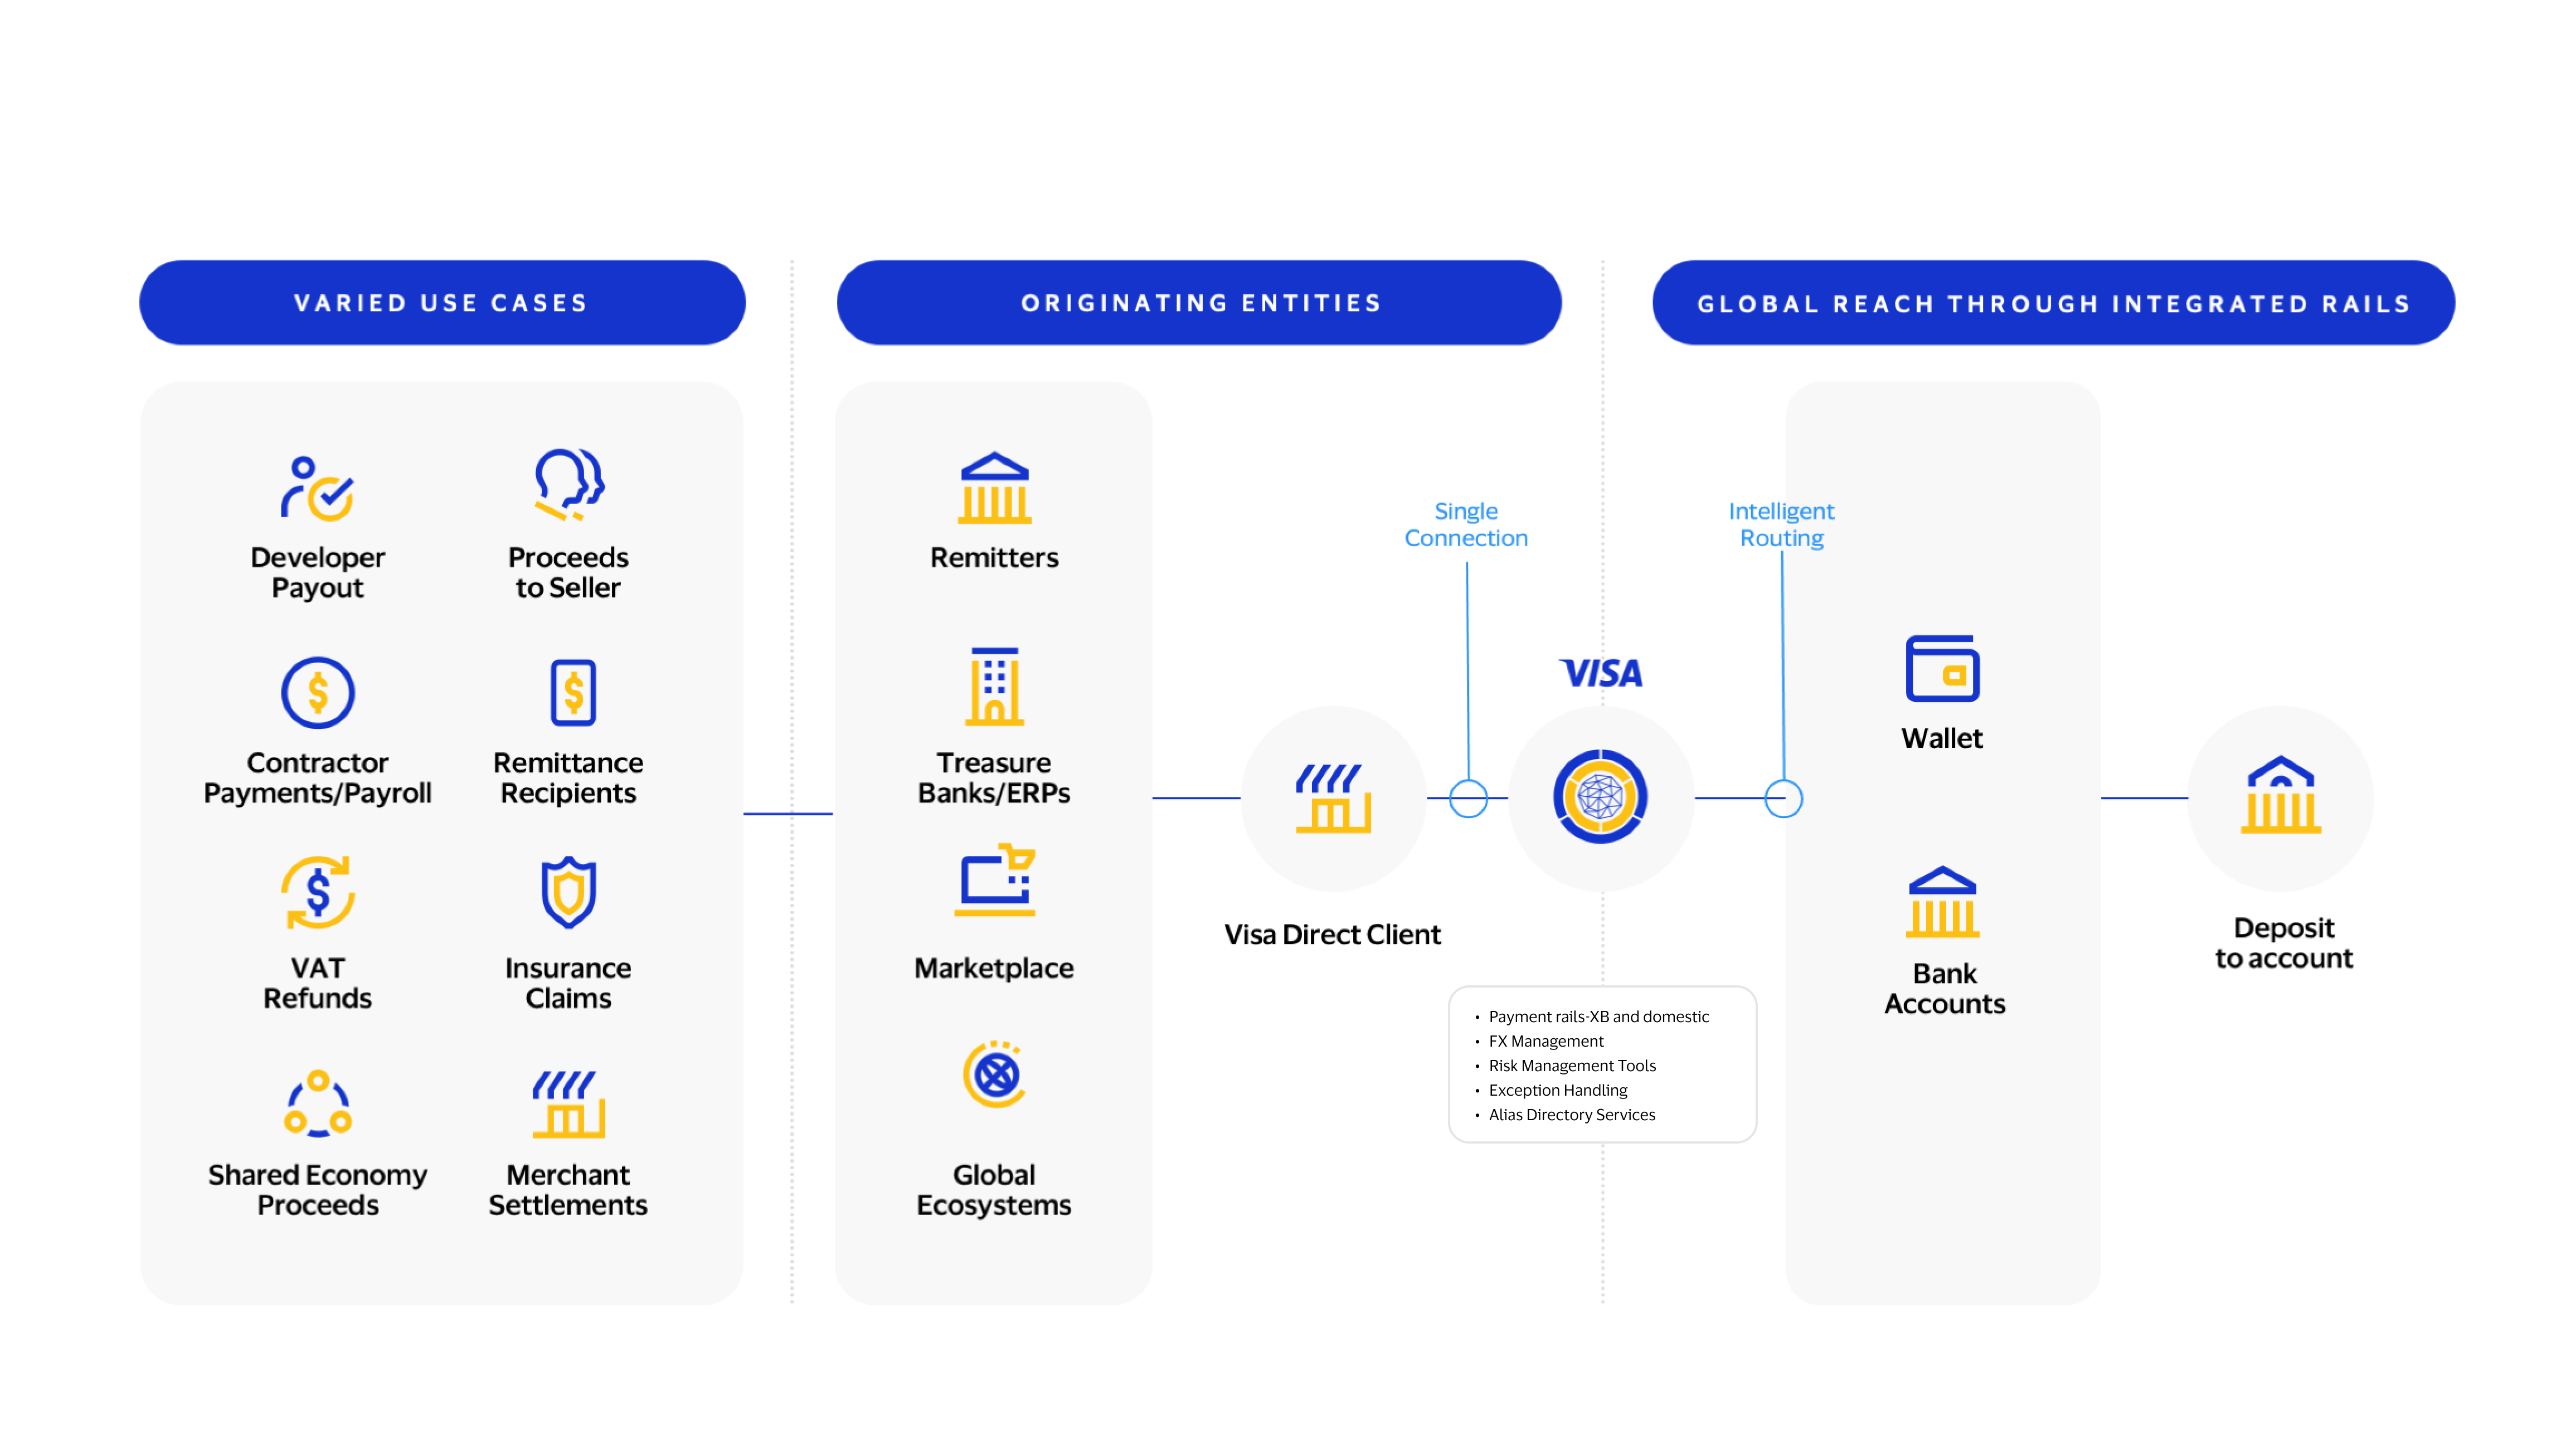 This image explains the various use-cases of moving funds from and to Bank Account and Wallet using Visa Direct Account and Wallet APIs.